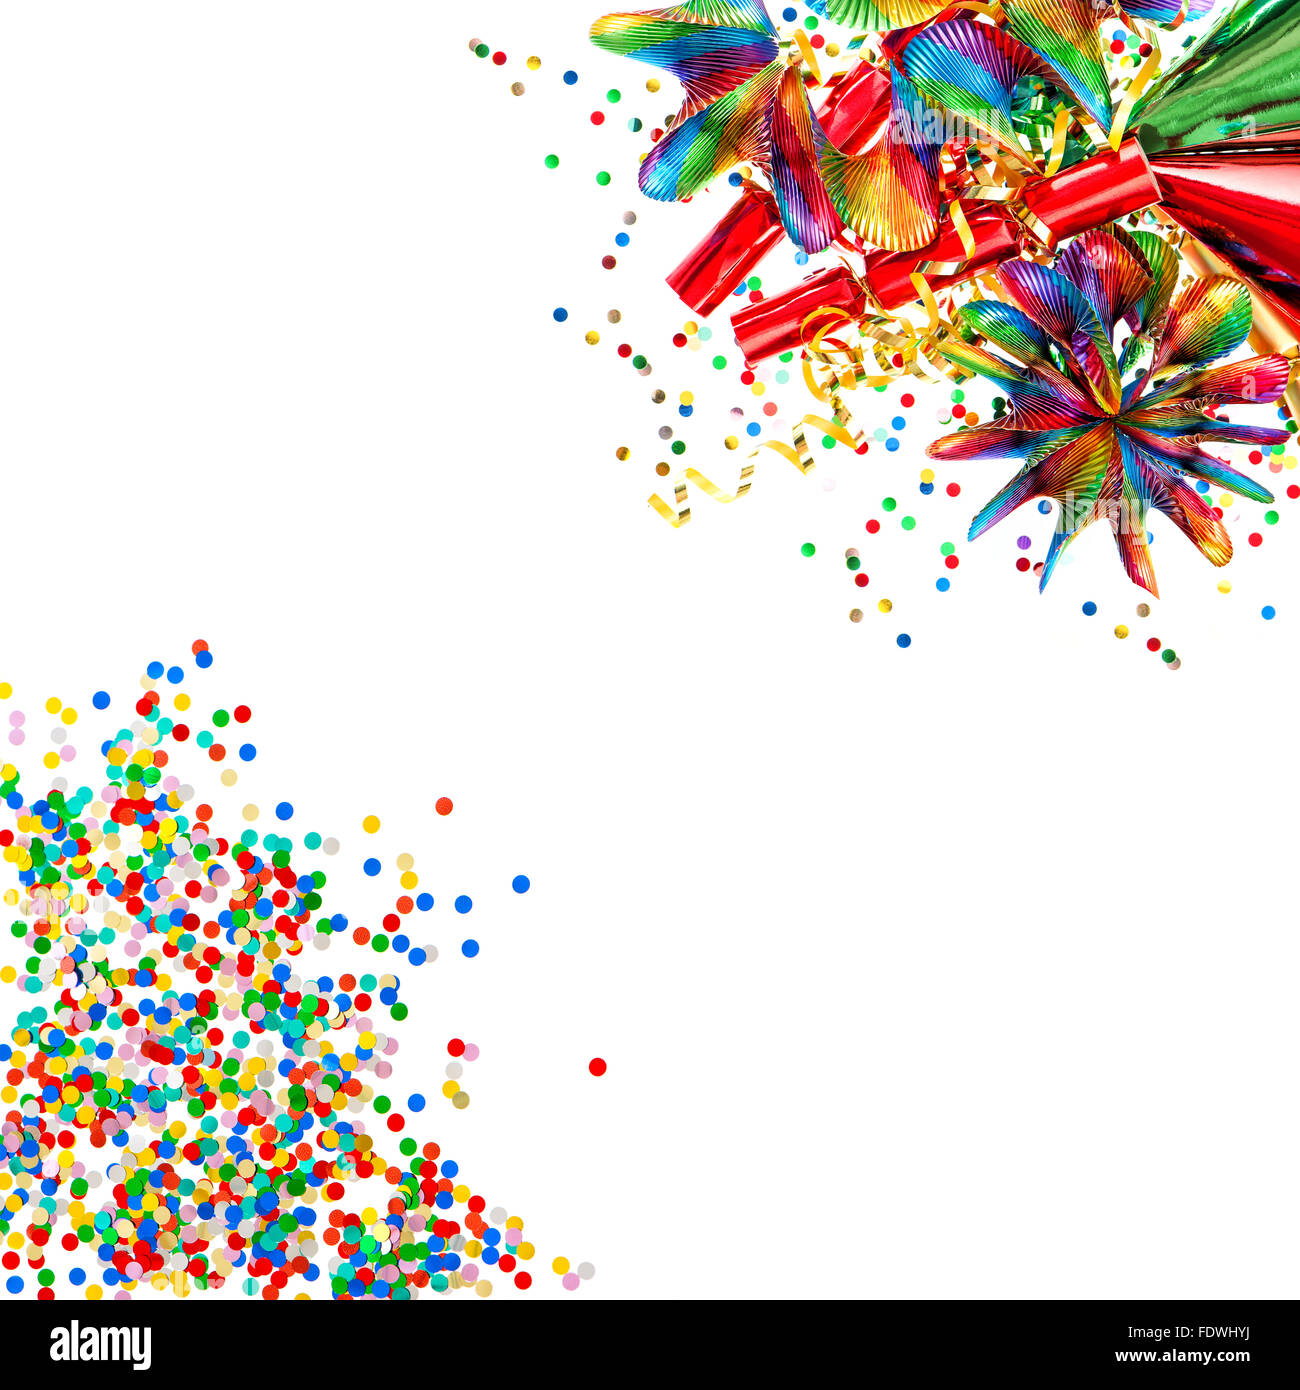 Garlands, streamer, cracker, party hats and confetti. Decoration Stock Photo